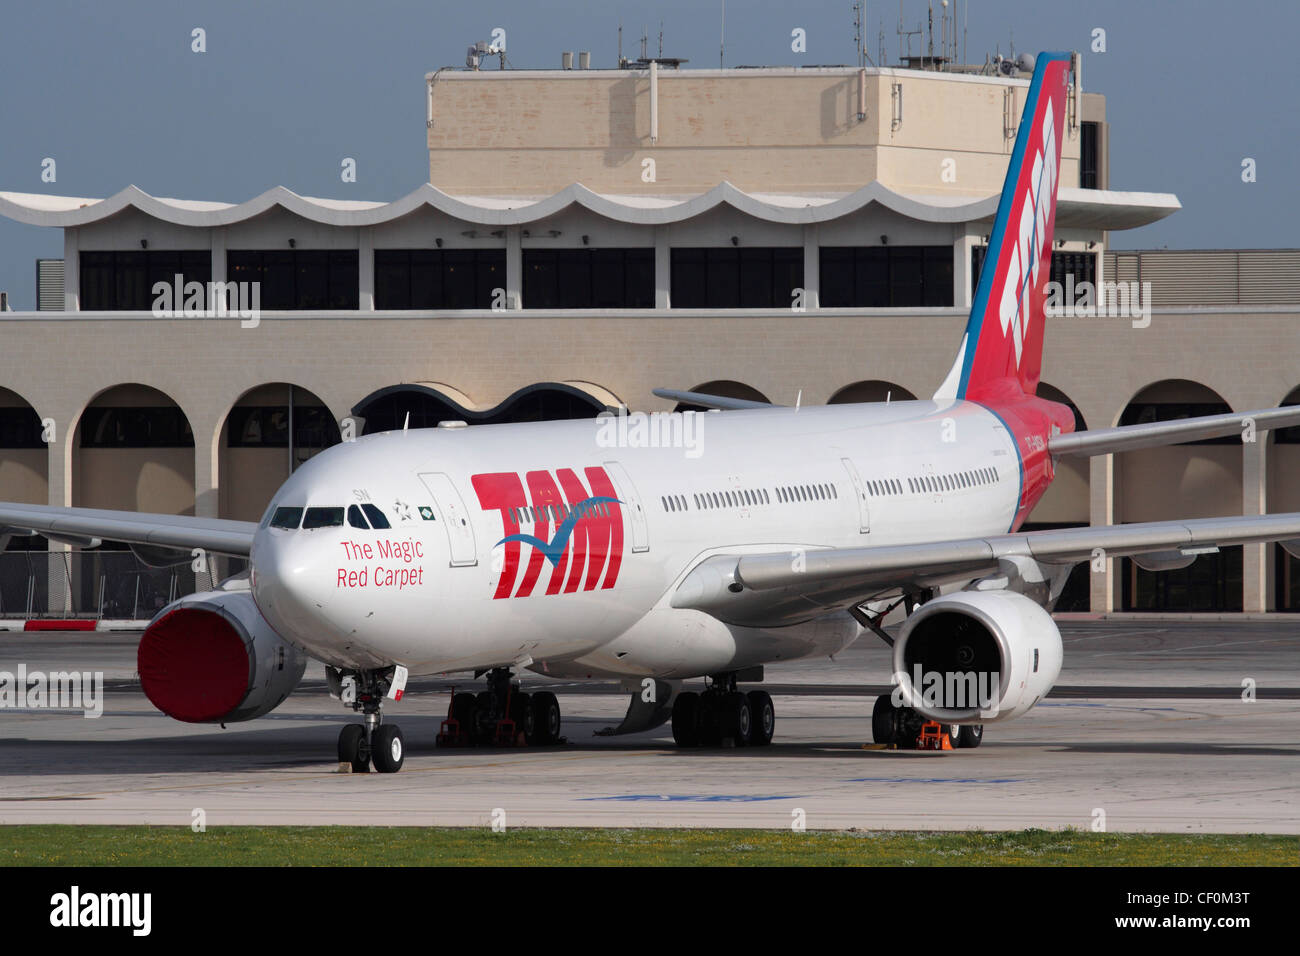 Airbus A340-500 widebody passenger jet operated by TAM Airlines of Brazil on the ground Stock Photo